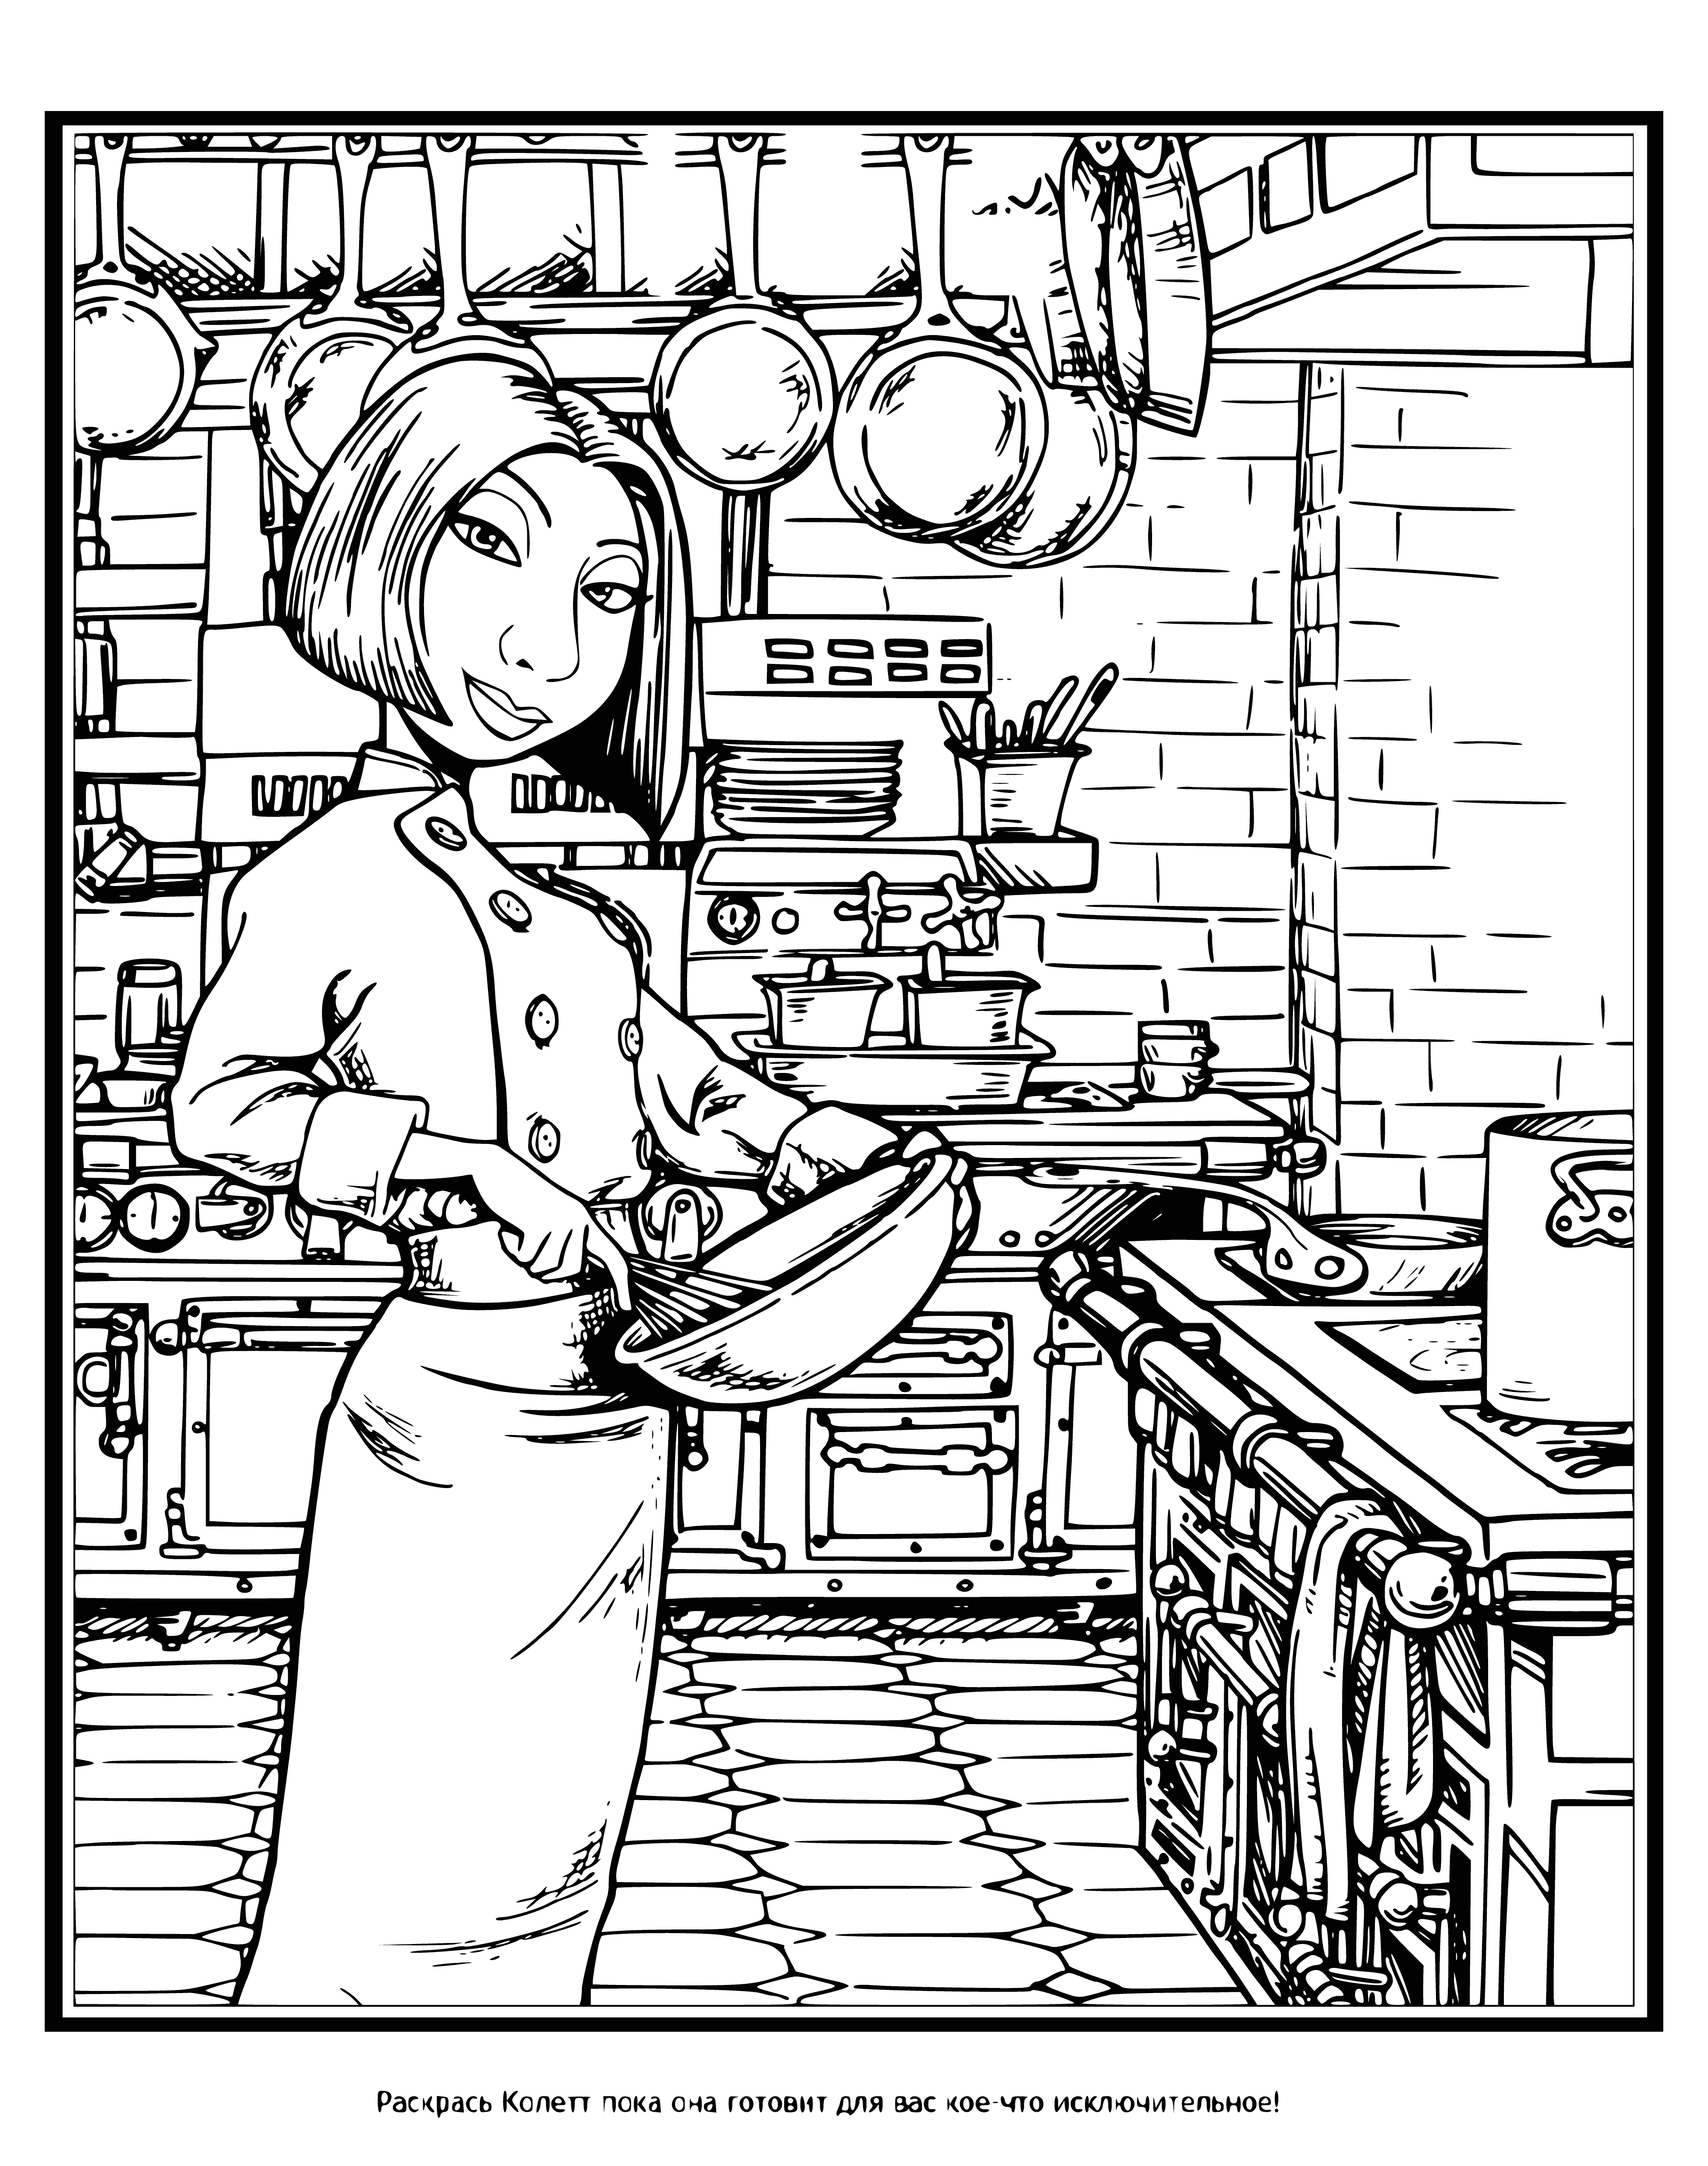 coloring page: Chef cooks in kitchen, chopping veggies and adding spices to pot on stove, stirring contents.